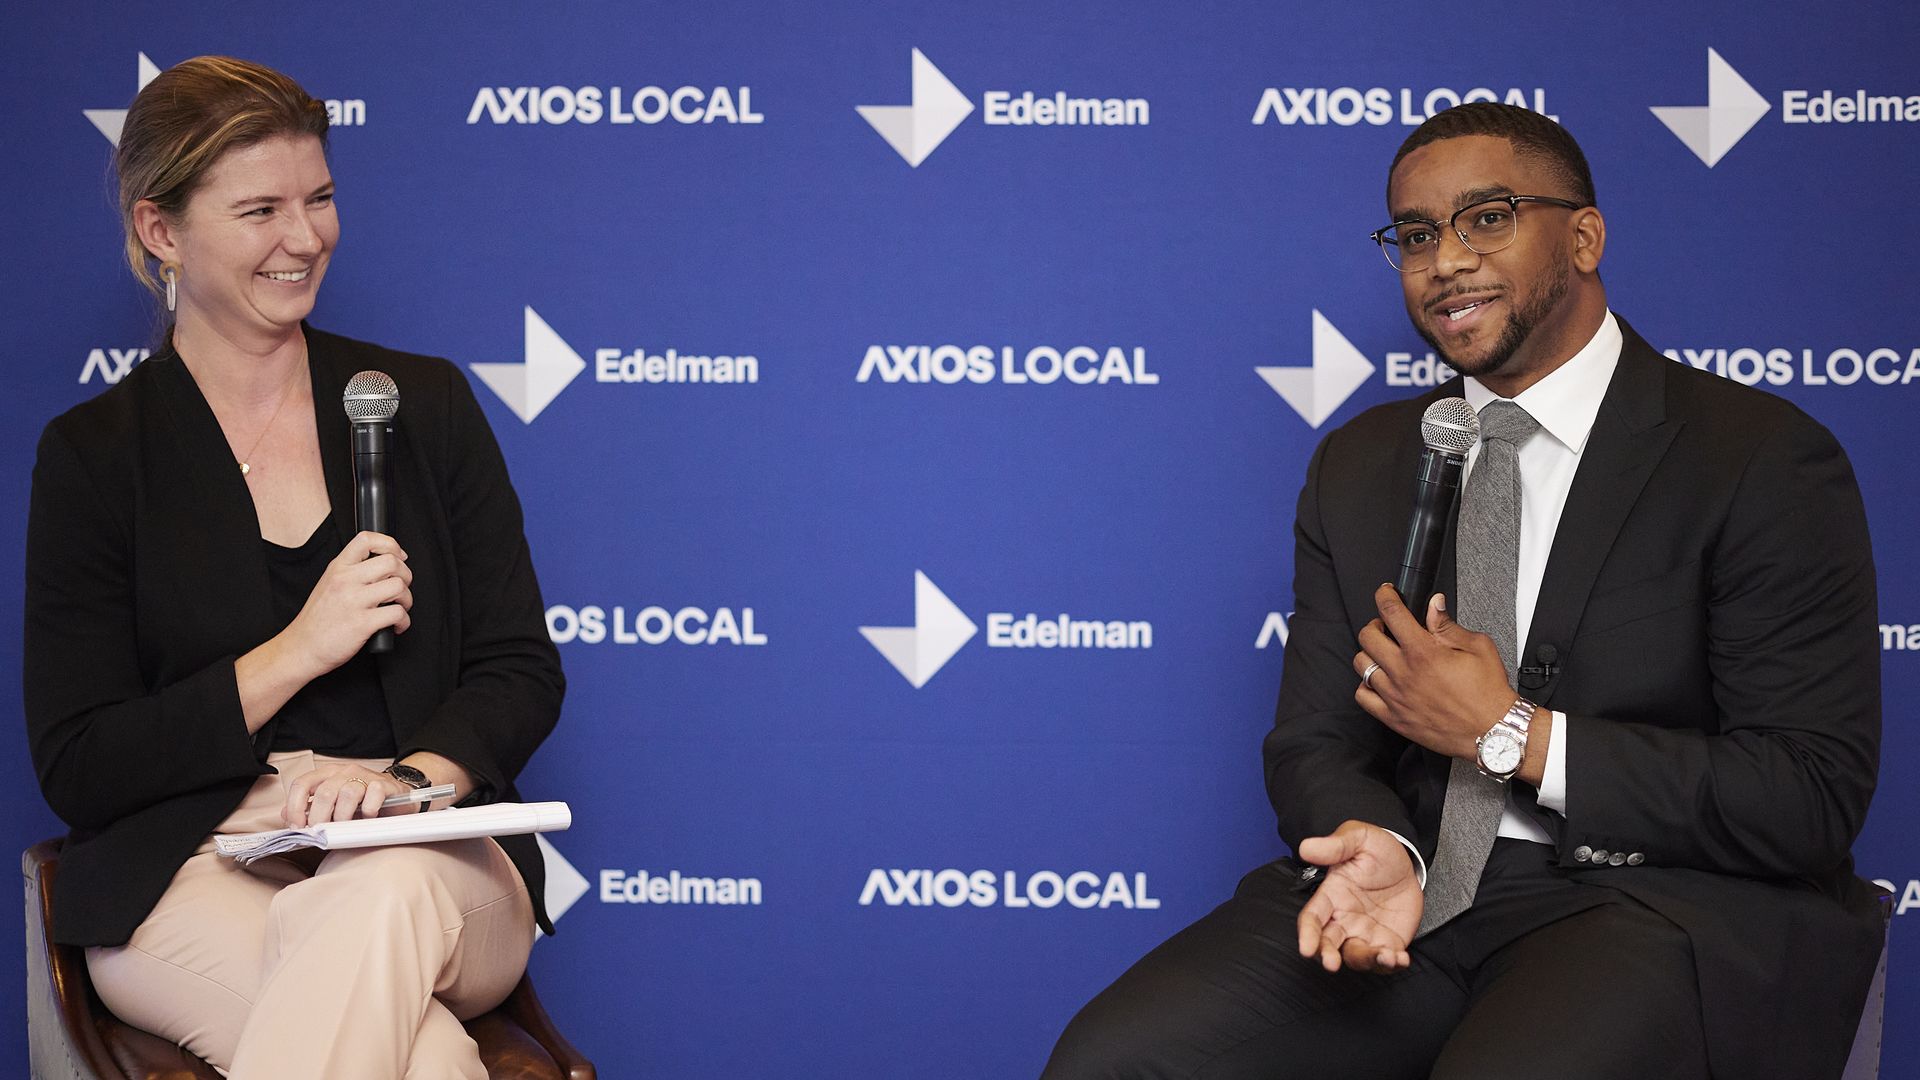 A woman holds a microphone and laughs while a man wearing a suit speaks and smiles. Behind them a screen reads Axios Local and Edelman